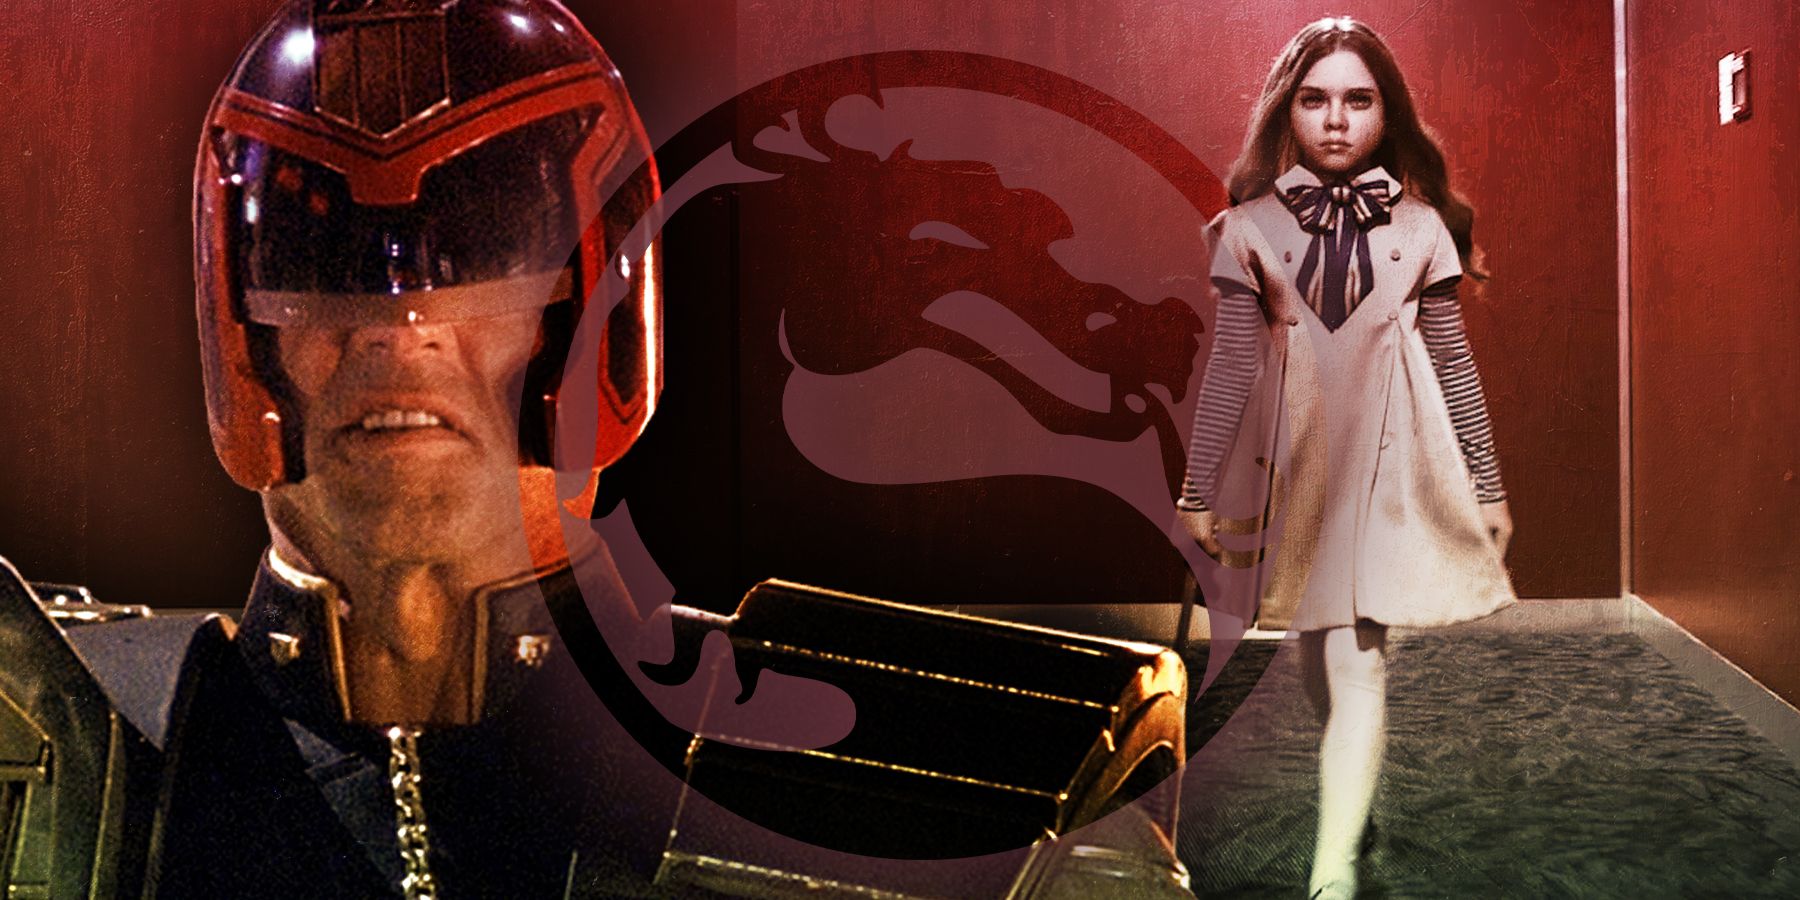 Mortal Kombat 12 Could Feature Peacemaker as a Guest Character – Rumour